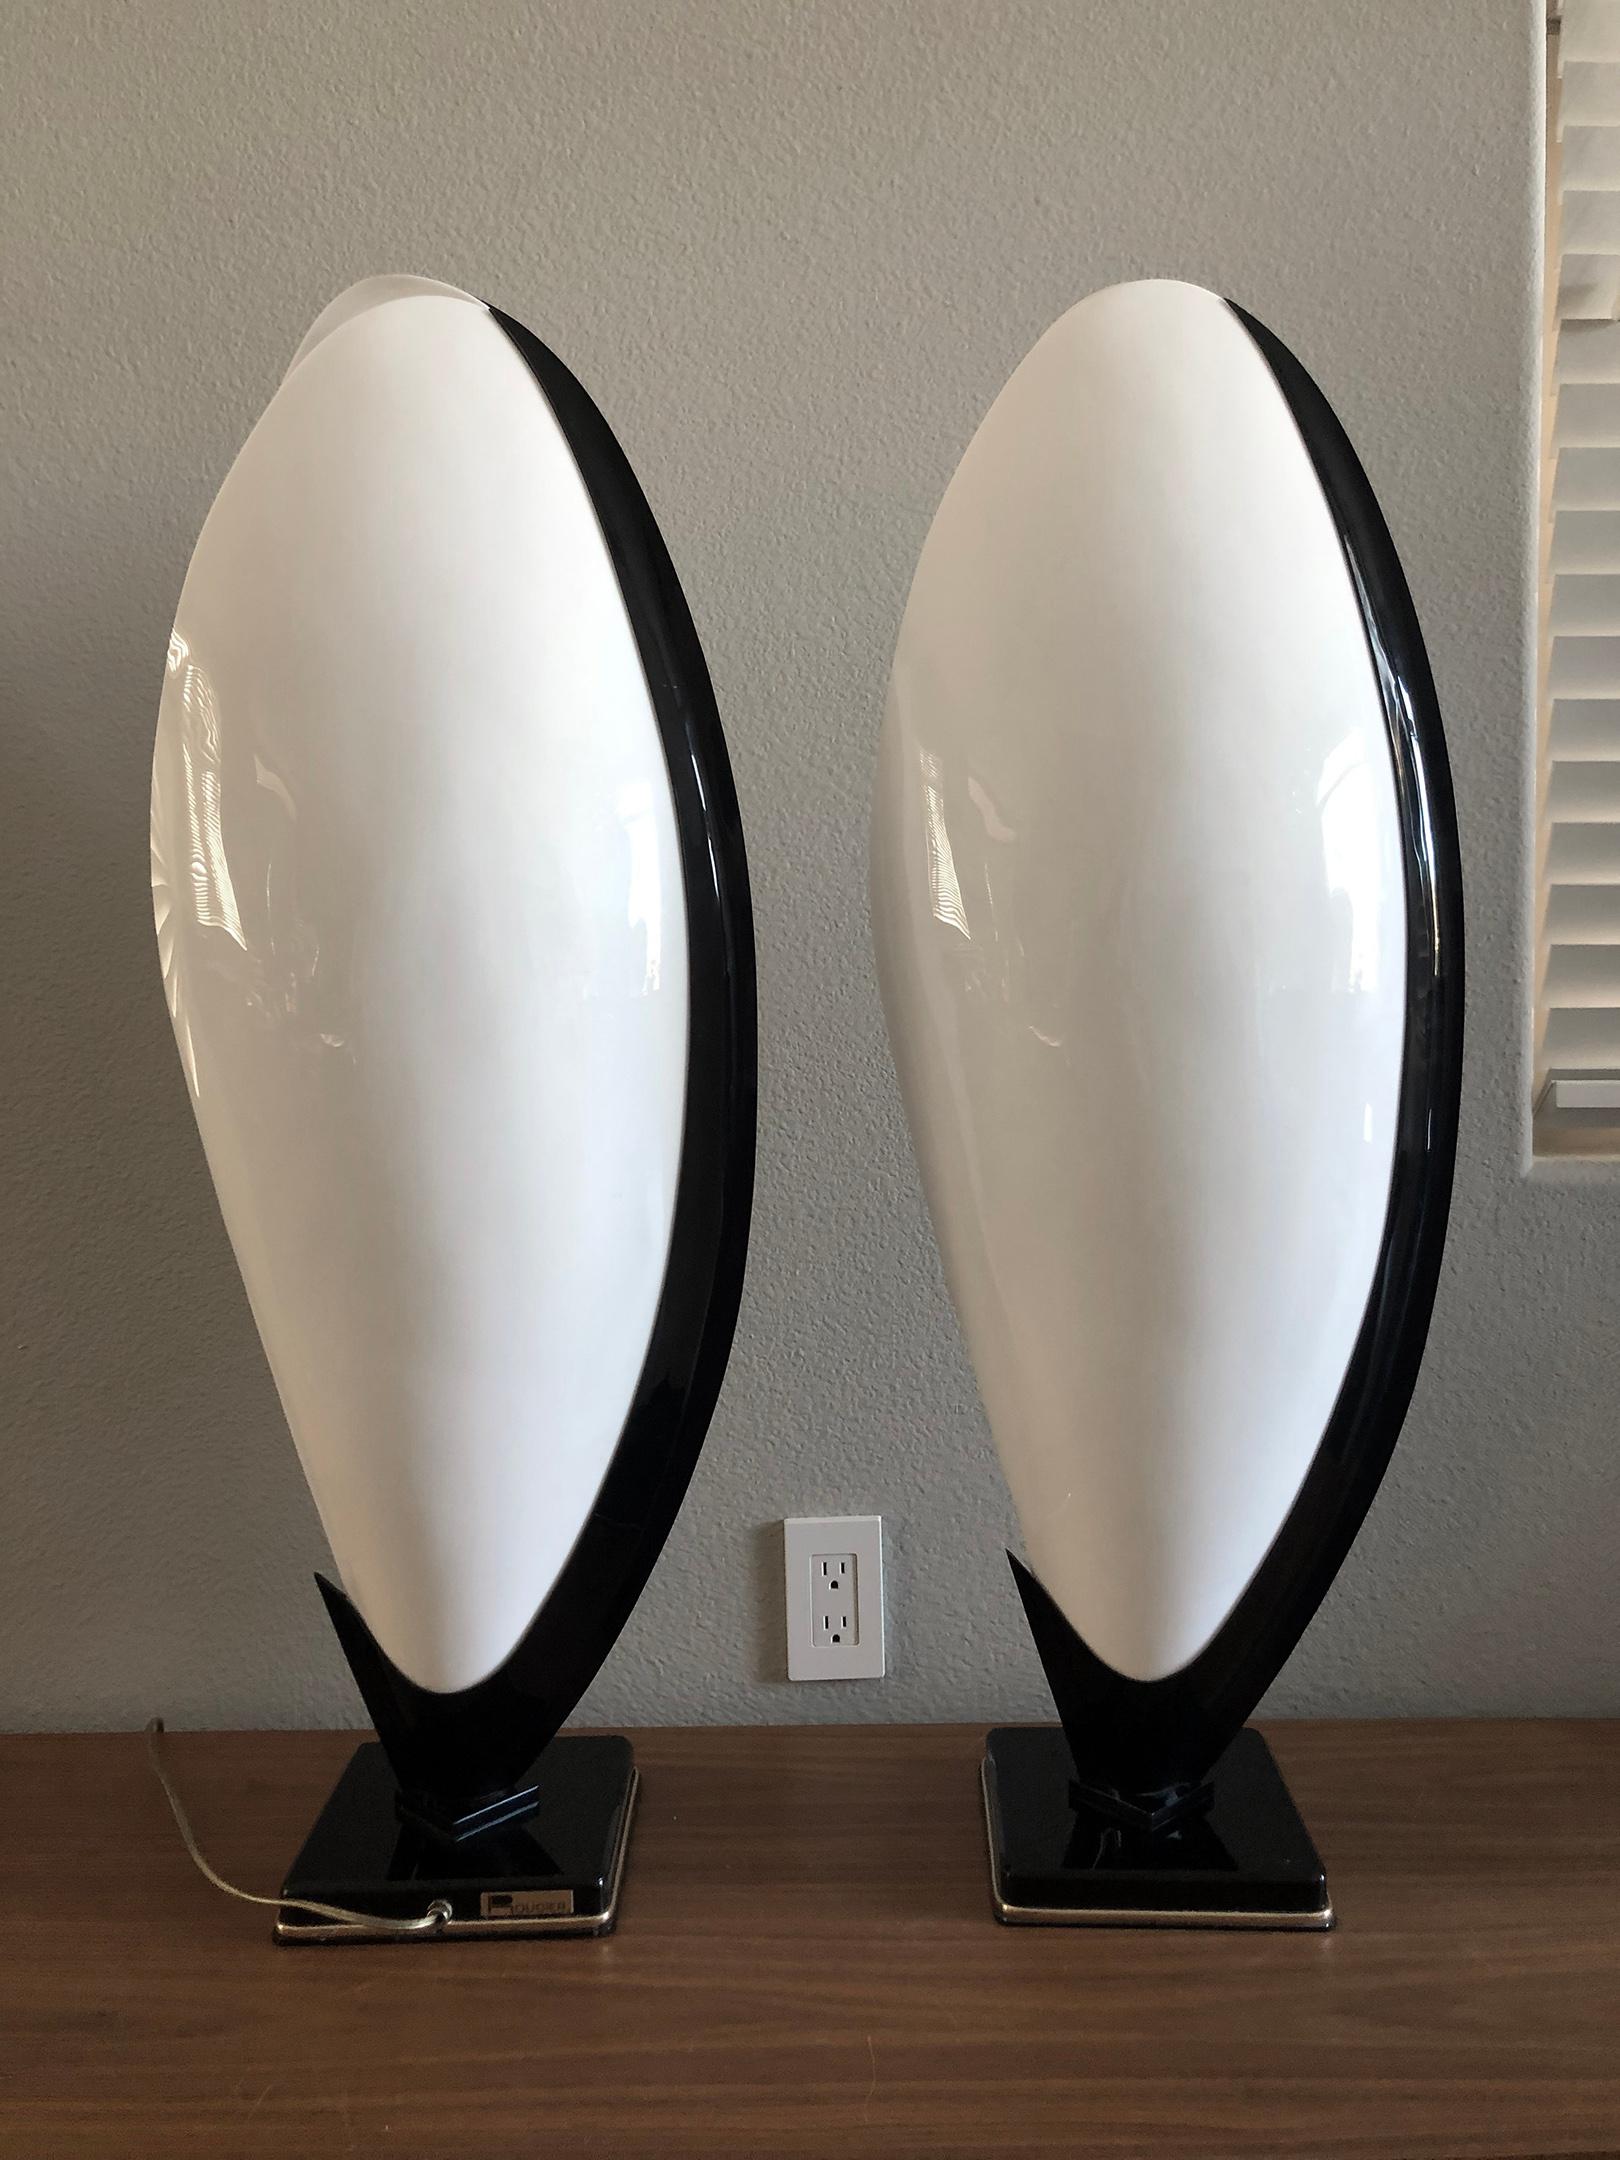 An absolutely gorgeous design by Rougier, these monumental sized oyster shaped acrylic table lamps are truly functional works of art. Dealers in the past have actually marketed these lamps as floor lamps in the past. Within the listing, there is a